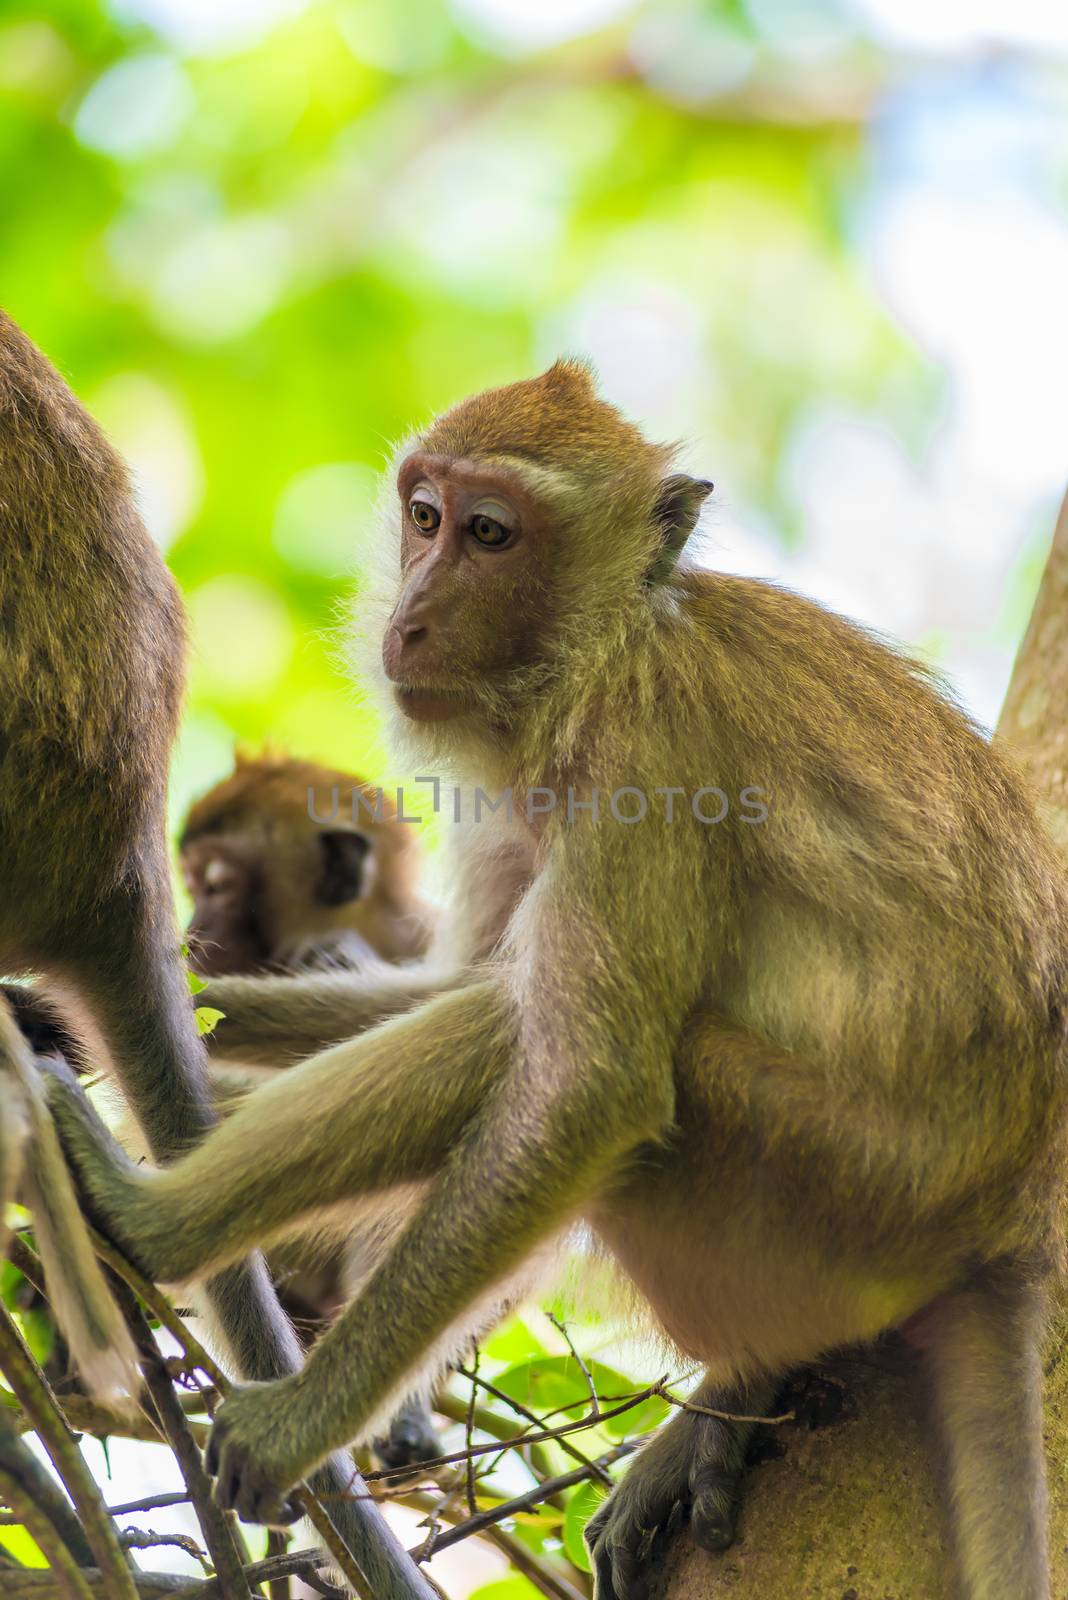 several monkeys in the tropical fox in Asia close up by kosmsos111